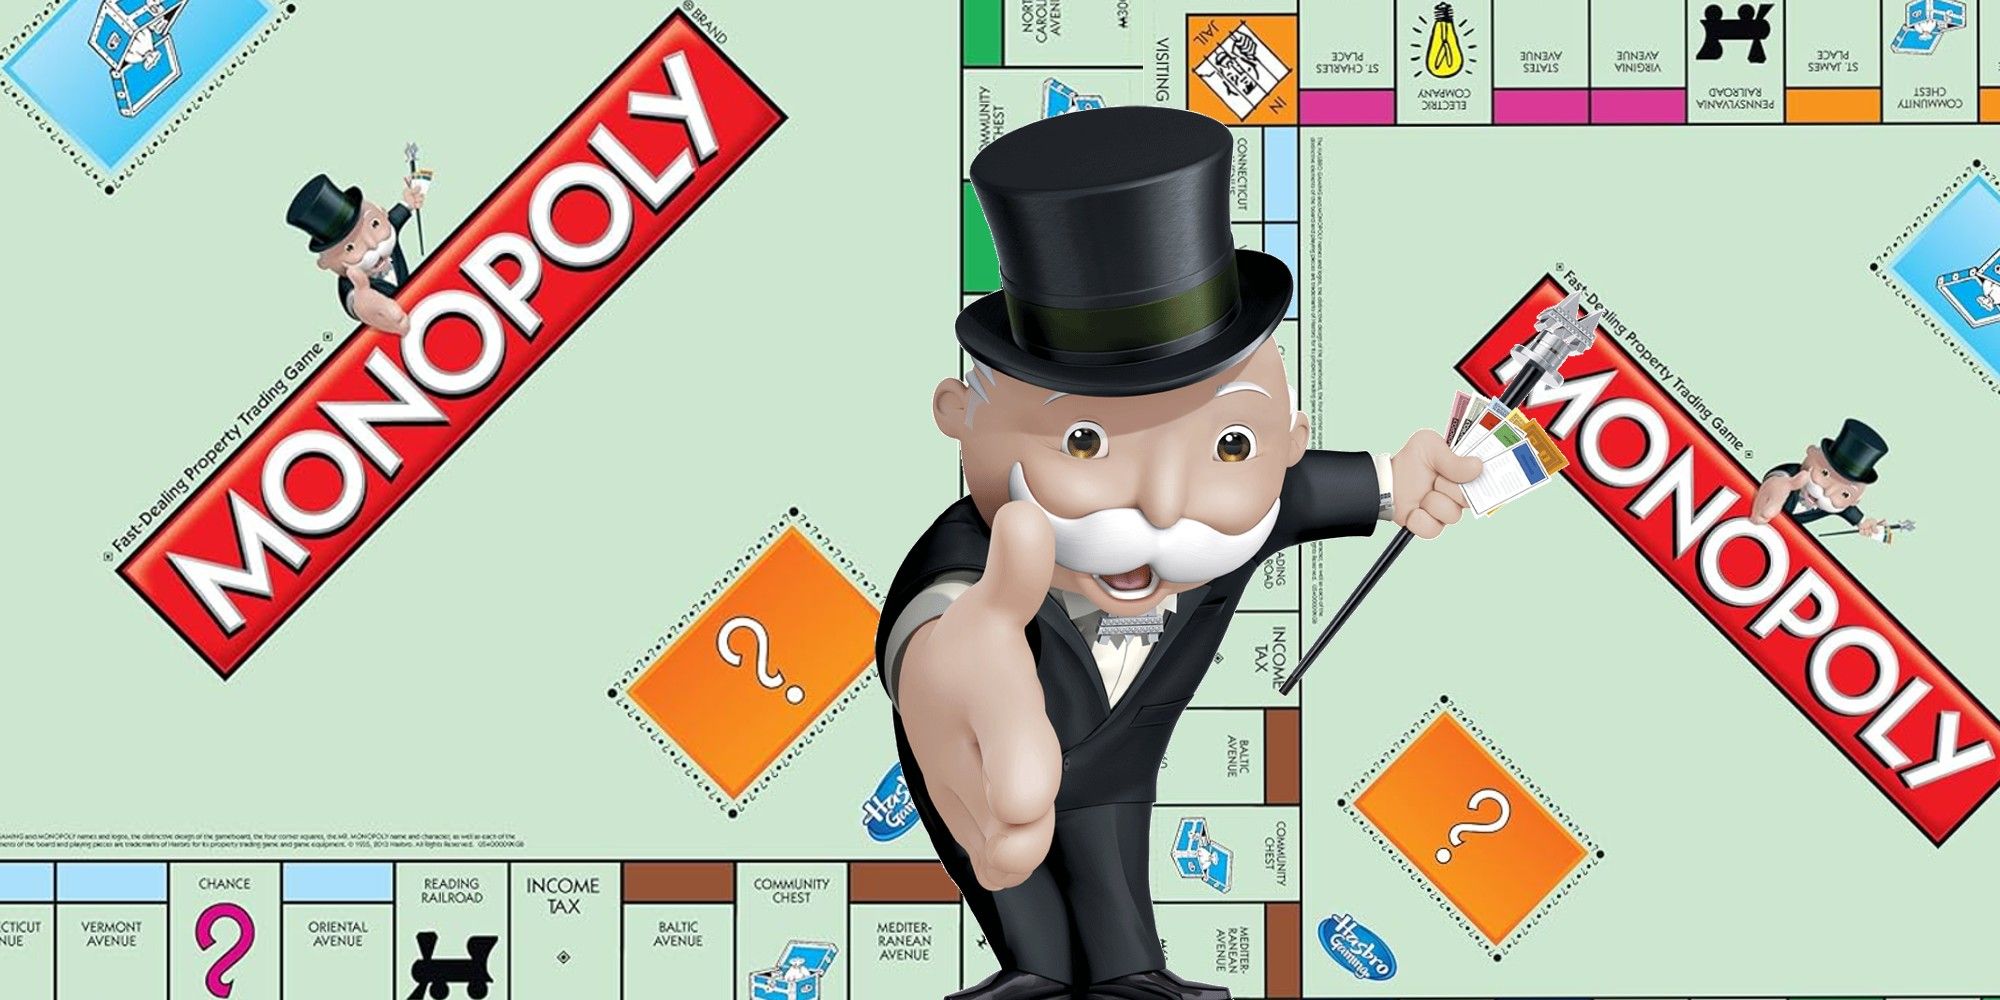 Mr Monopoly reaching out to shake a hand, in front of two alternating Monopoly boards